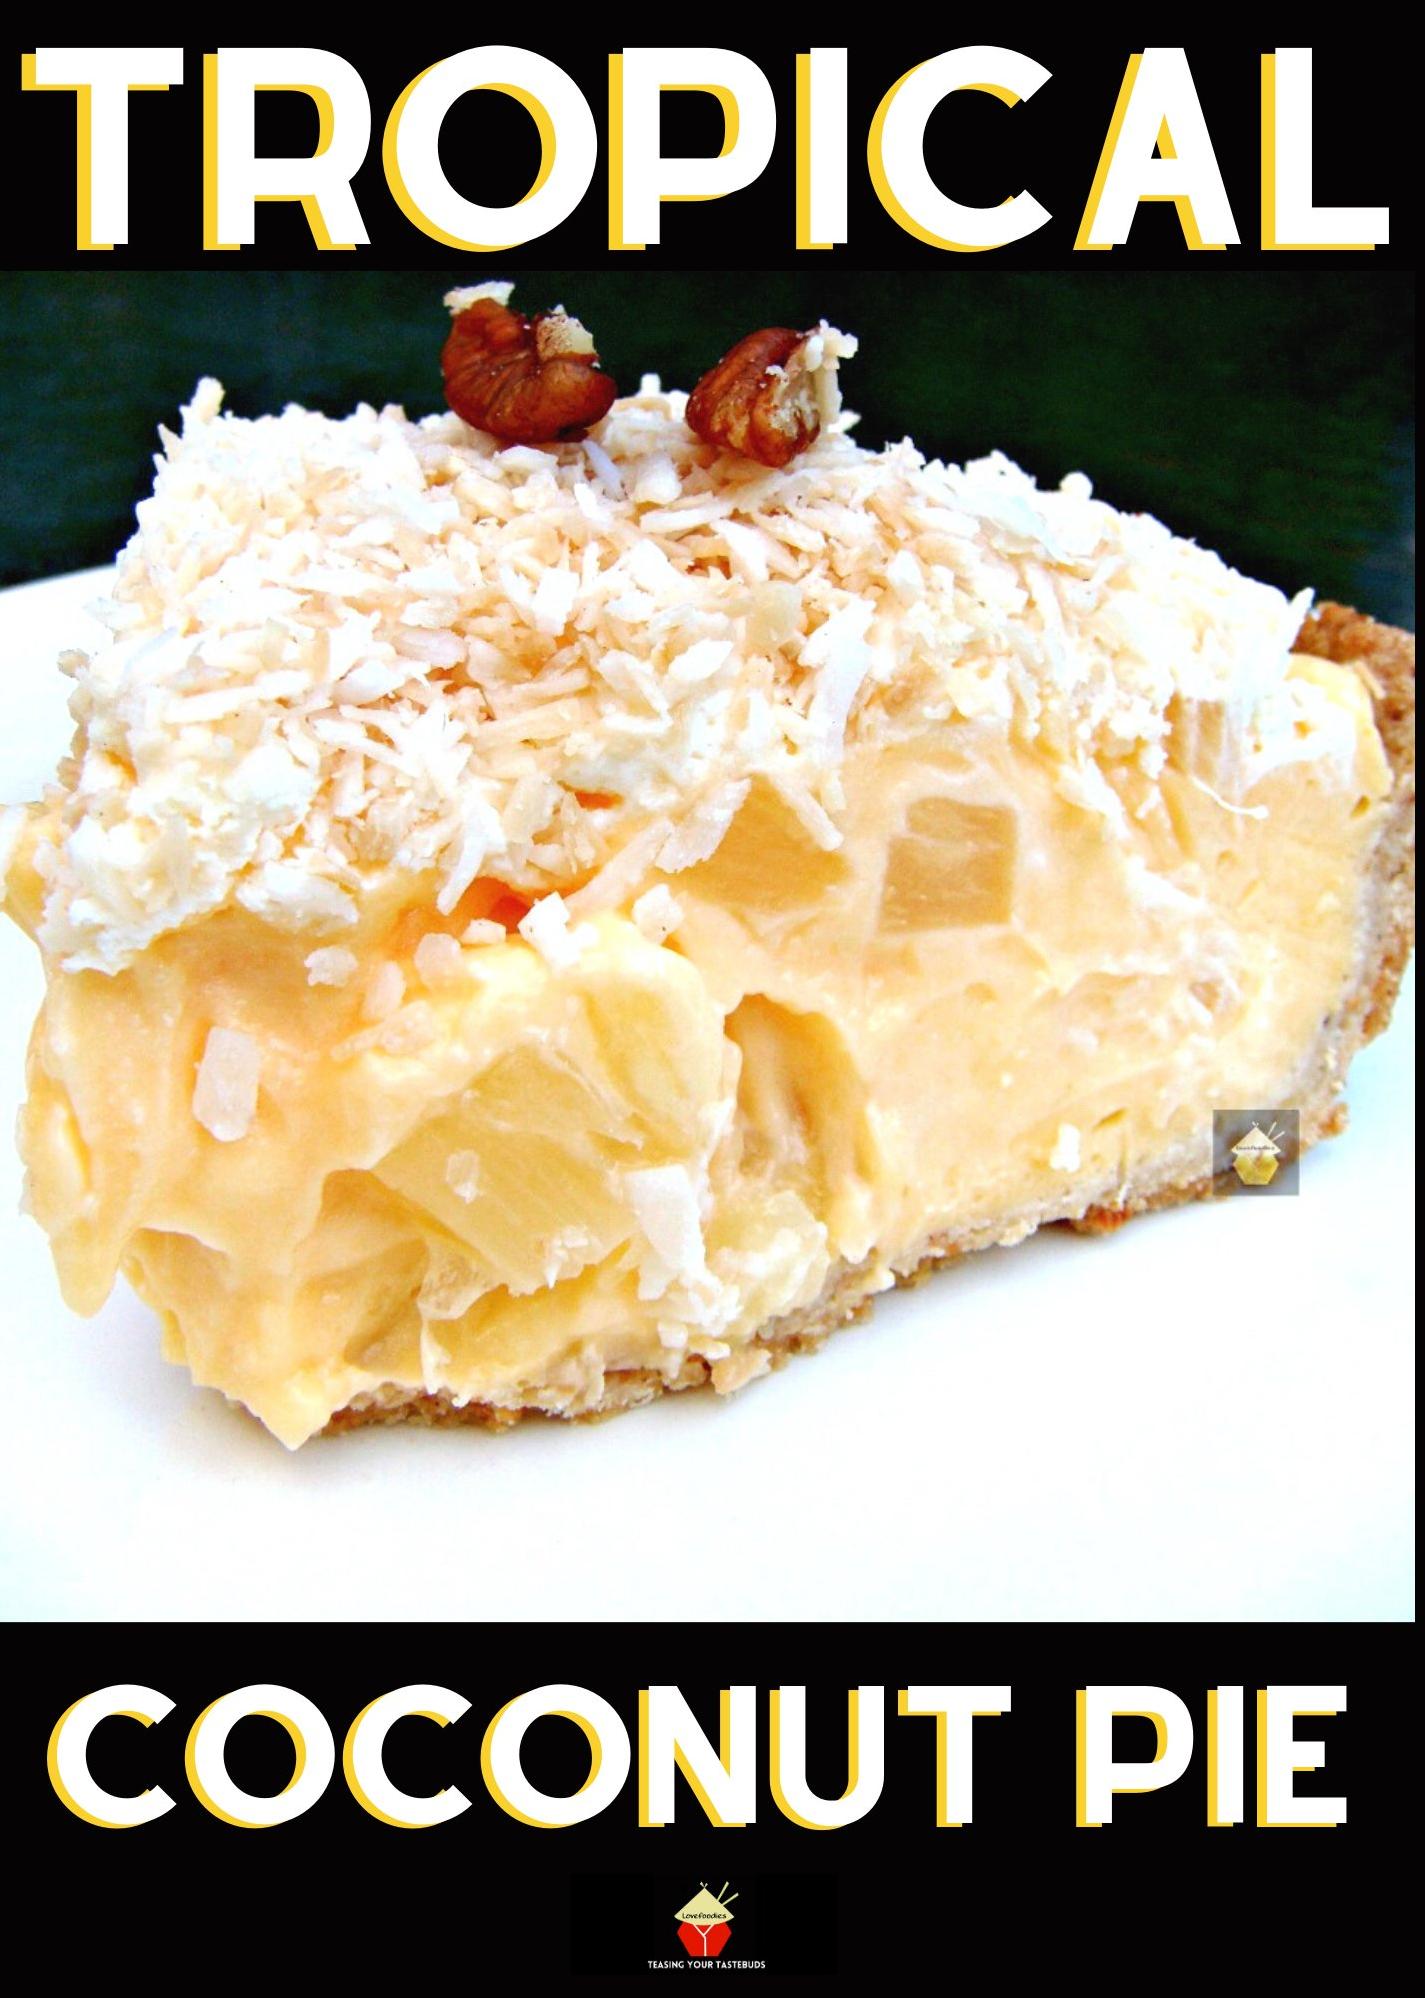  The creamy coconut filling is perfectly balanced with the sweet and tangy flavors of the tropical fruit topping.